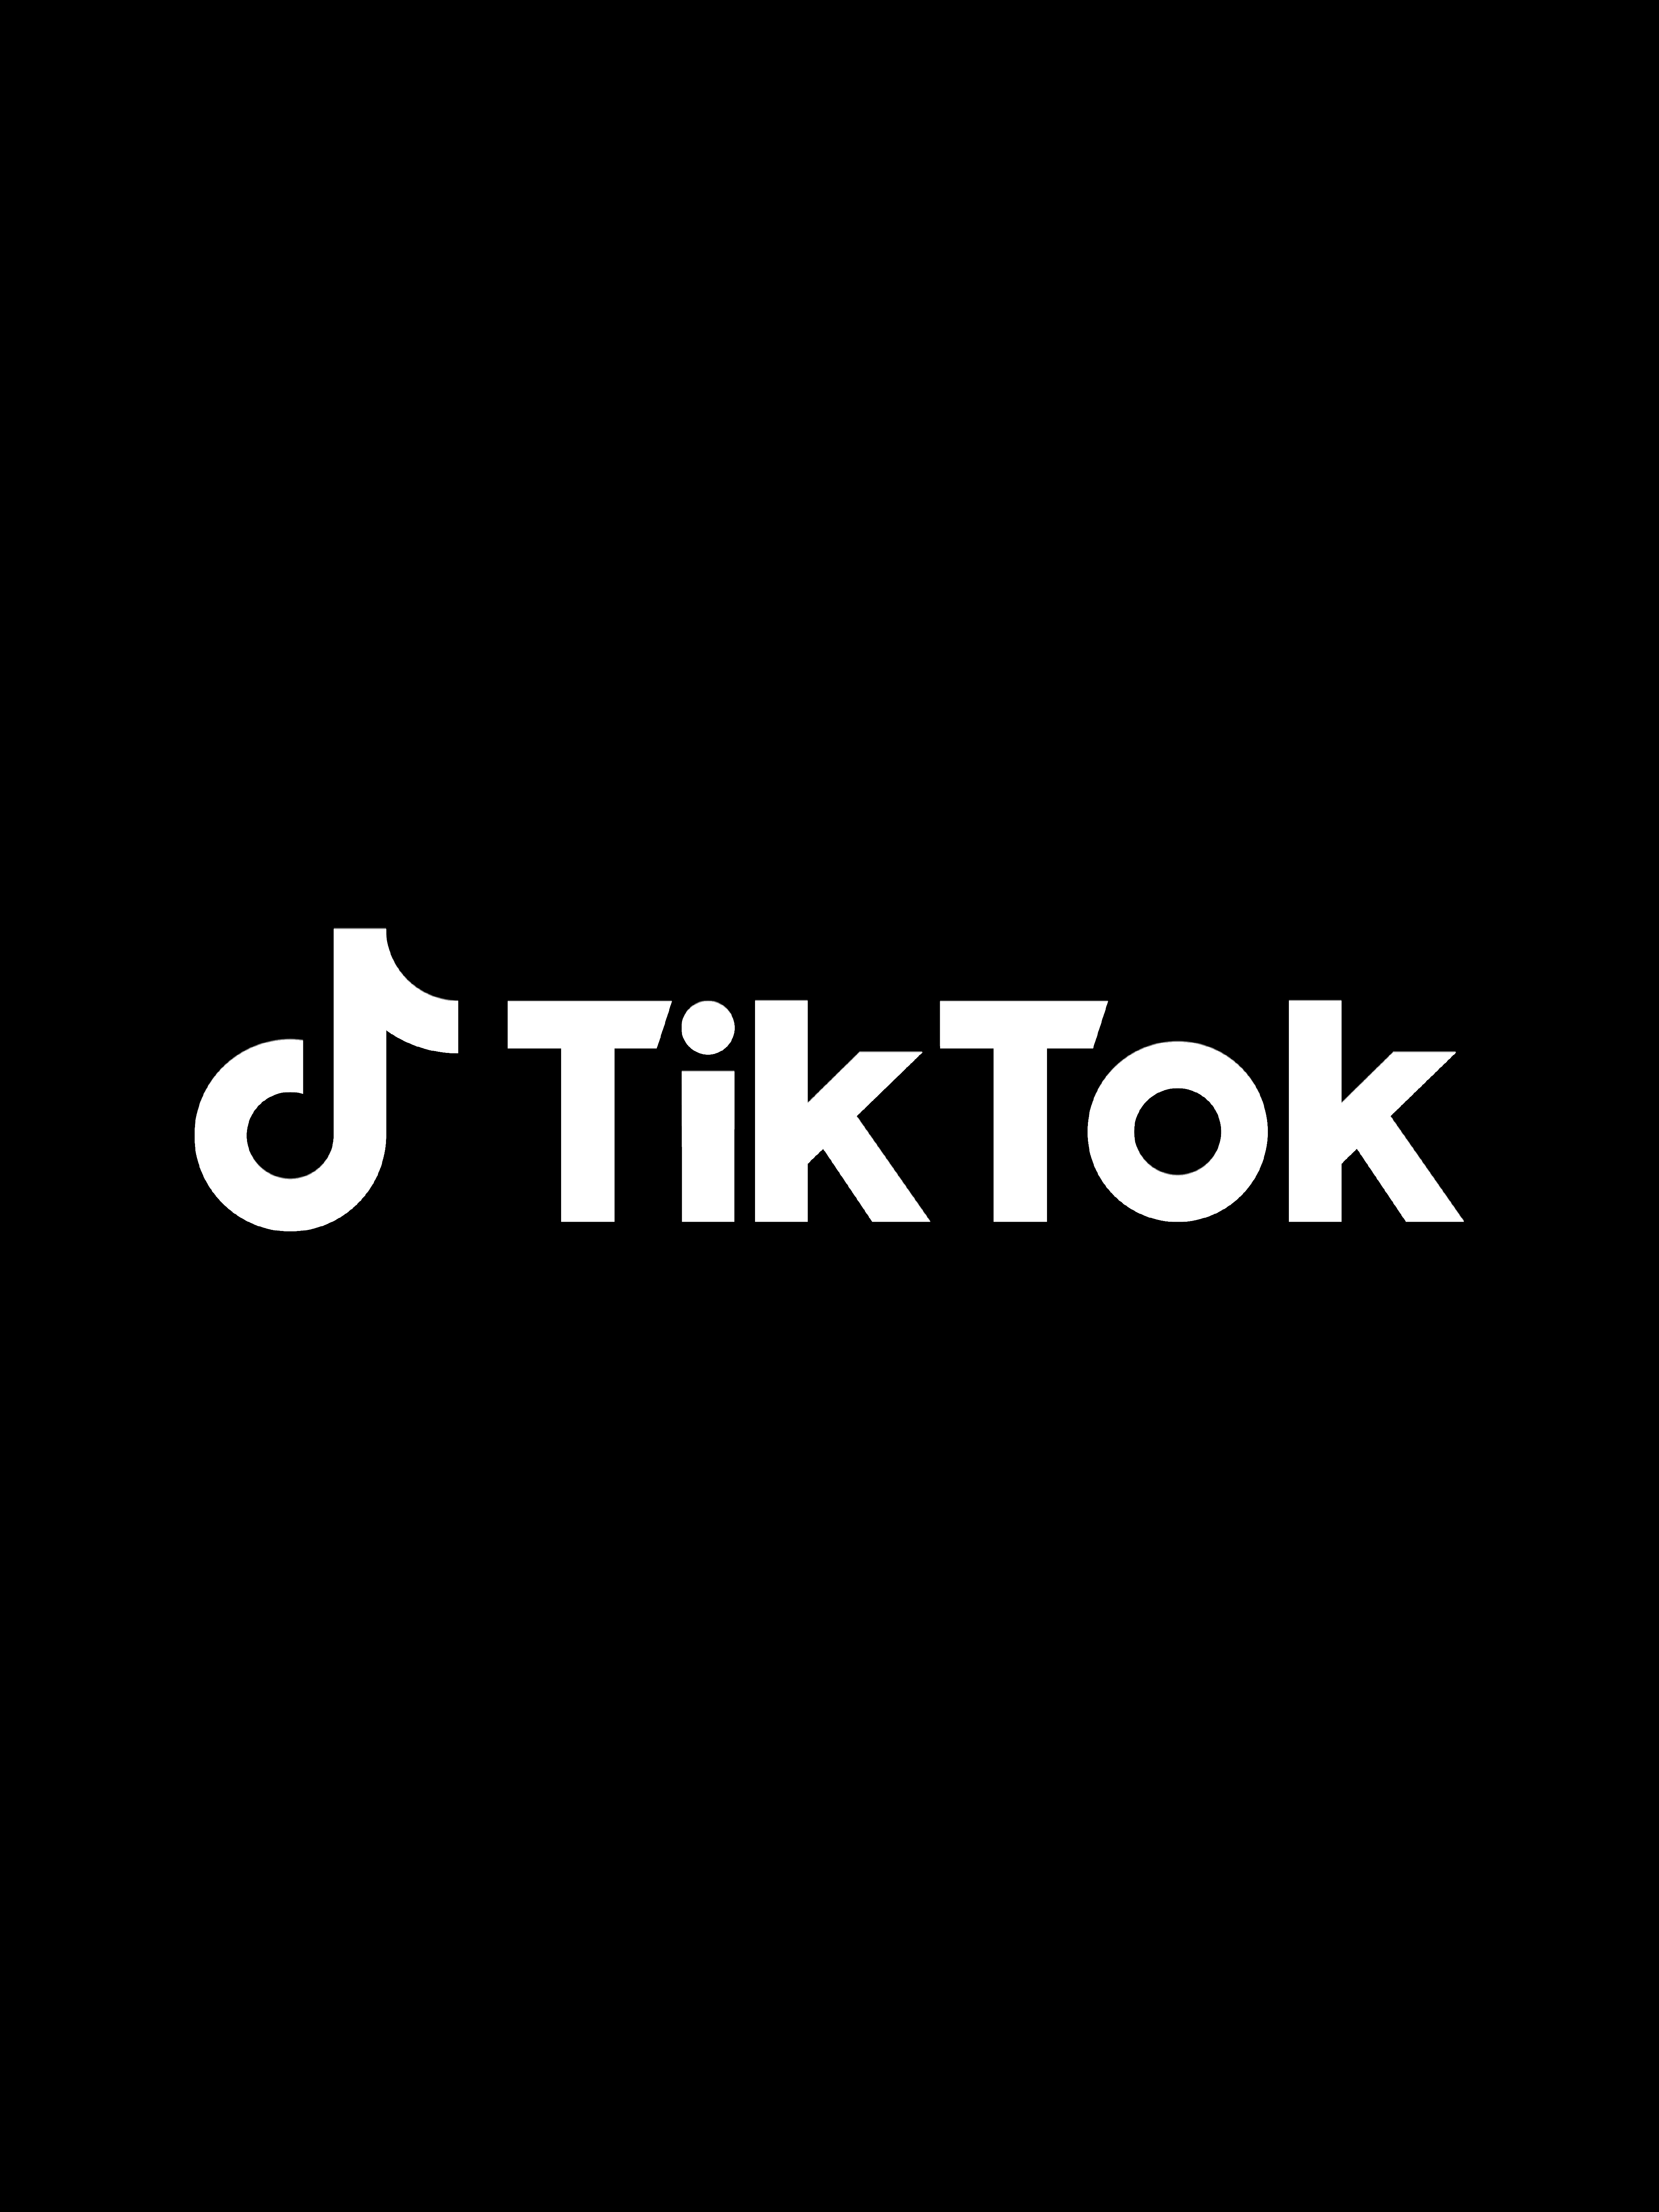 Recruiting in the digital age with TikTok